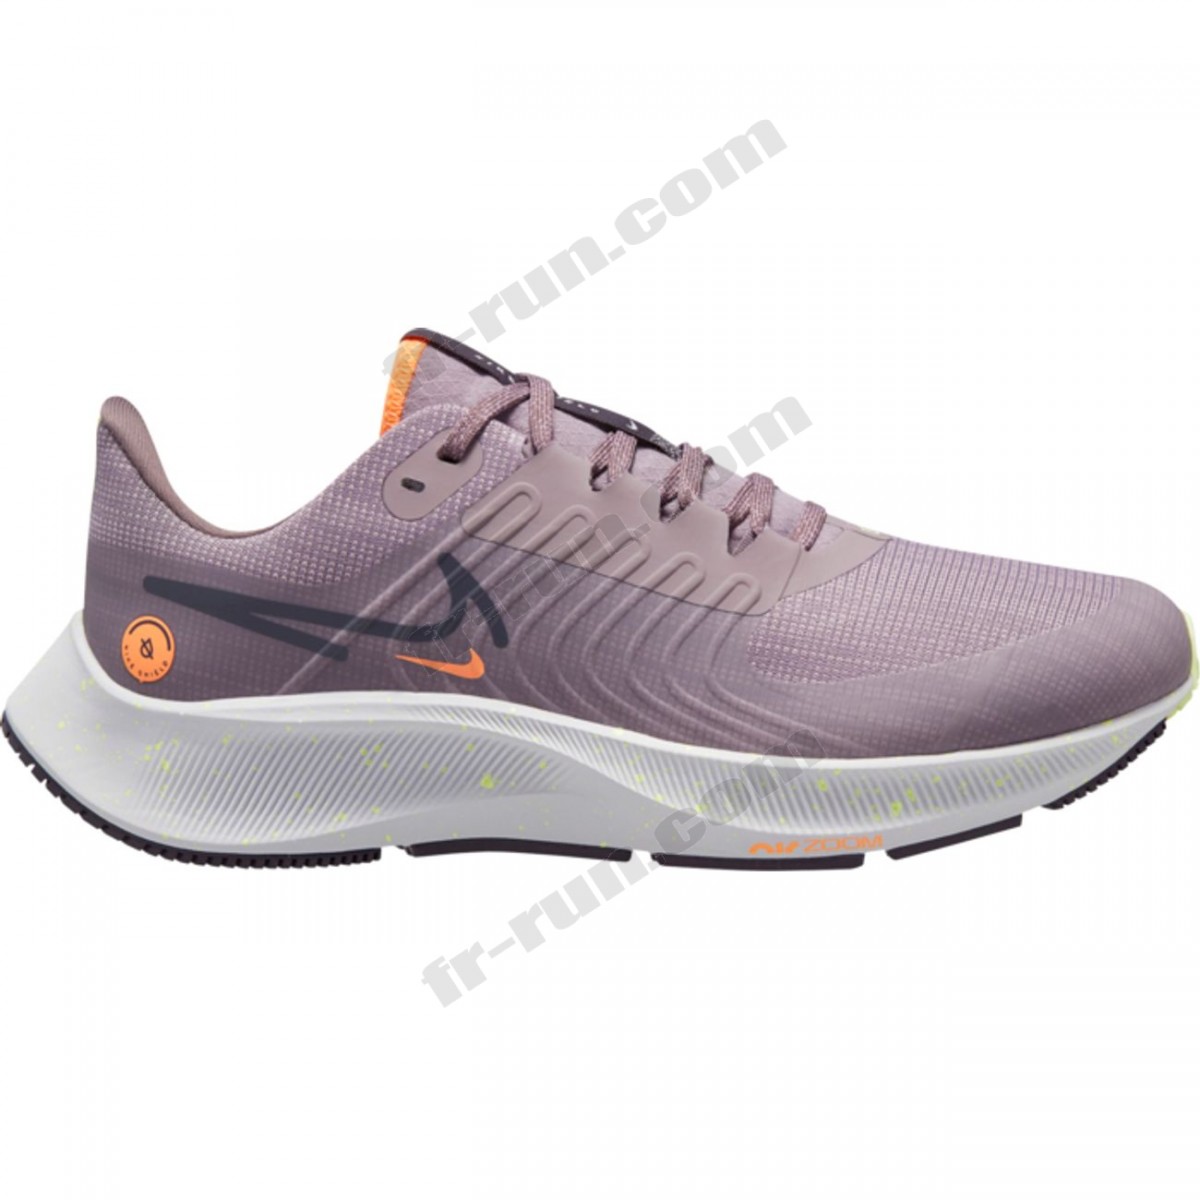 Nike/CHAUSSURES running femme NIKE W AIR ZOOM PEGASUS 38 SHIELD √ Nouveau style √ Soldes - -0